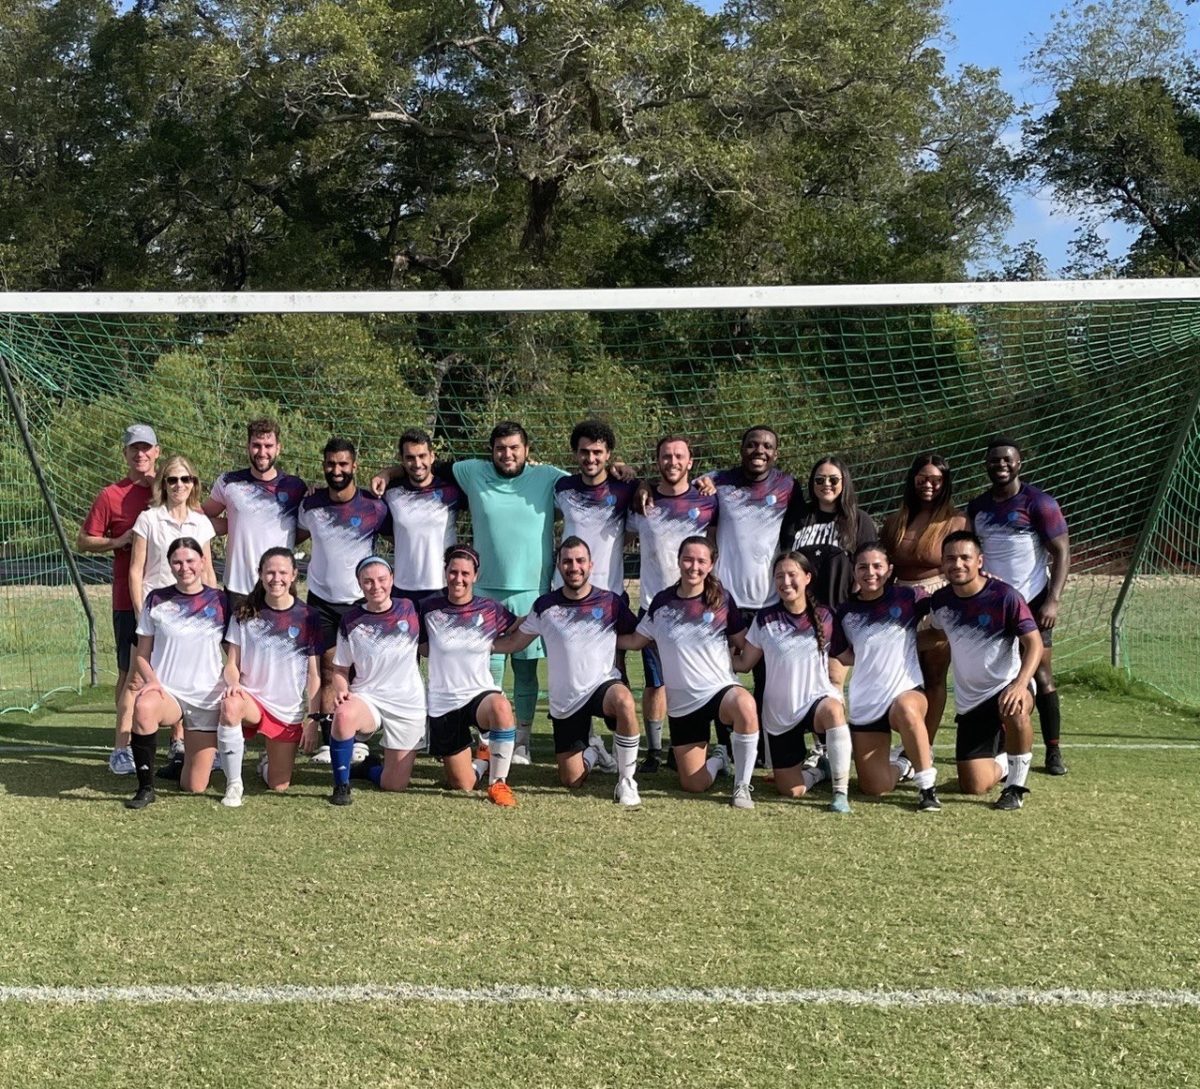 Ph.D. candidate, soccer coach shares personal impact of Texas’ intramural soccer program